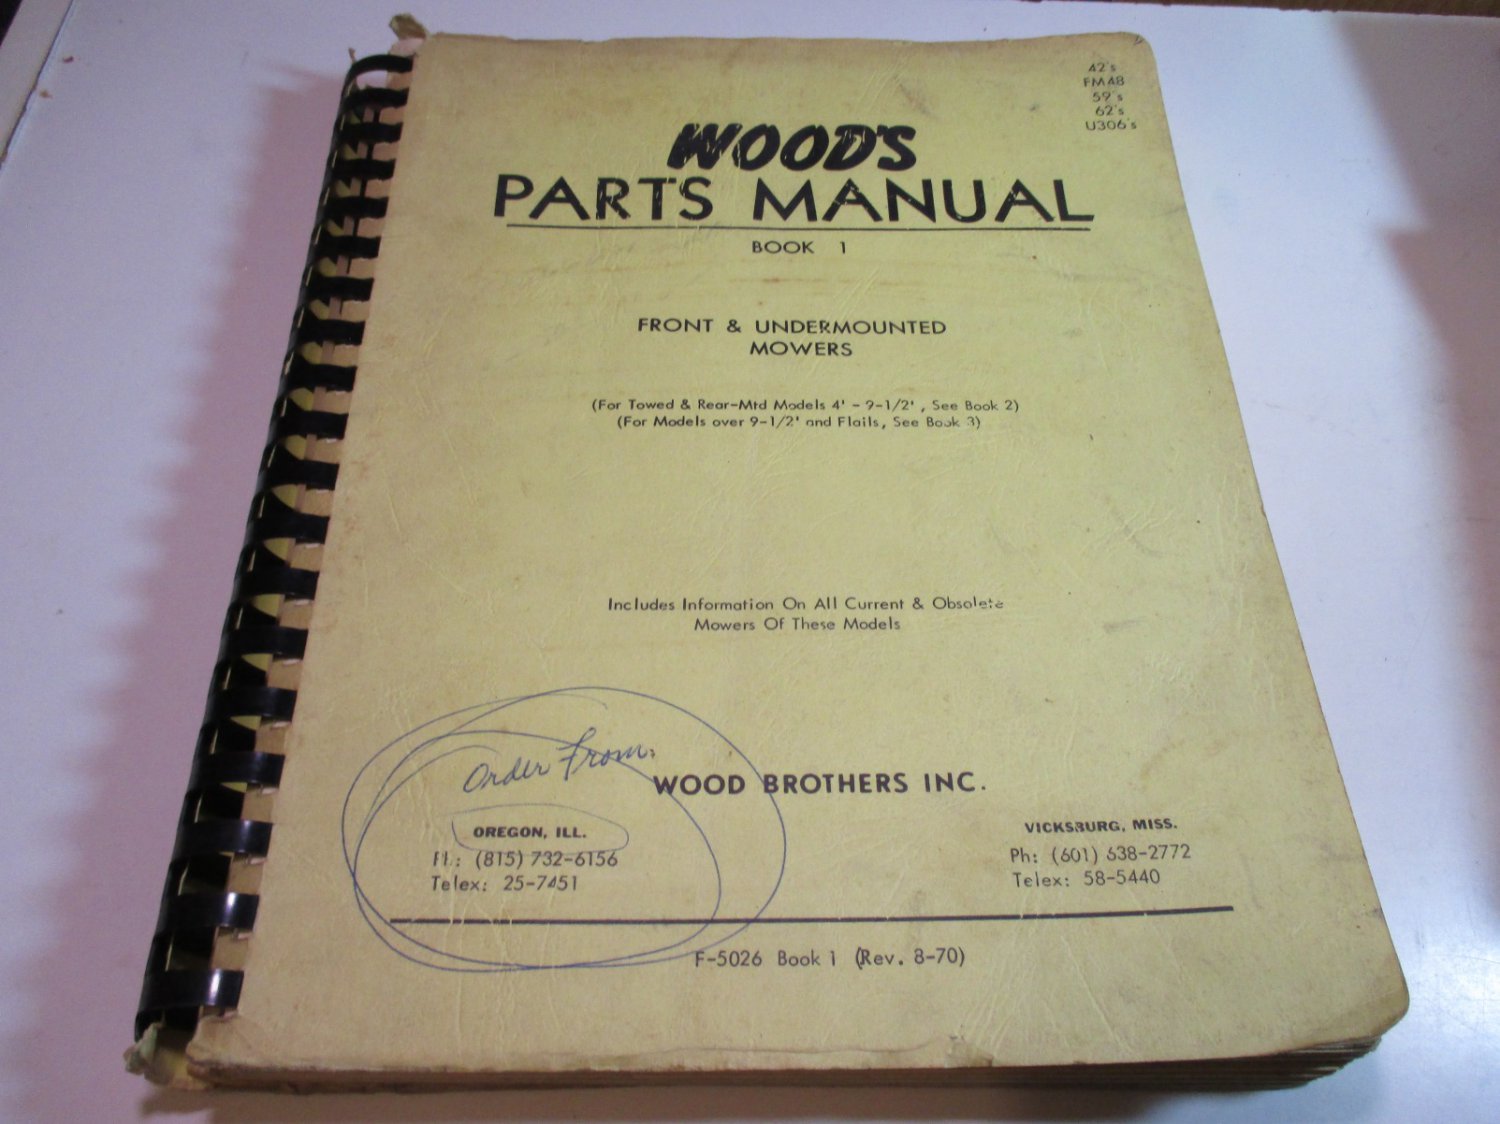 woods parts manual book 1 front & undermounted mowers F-5026